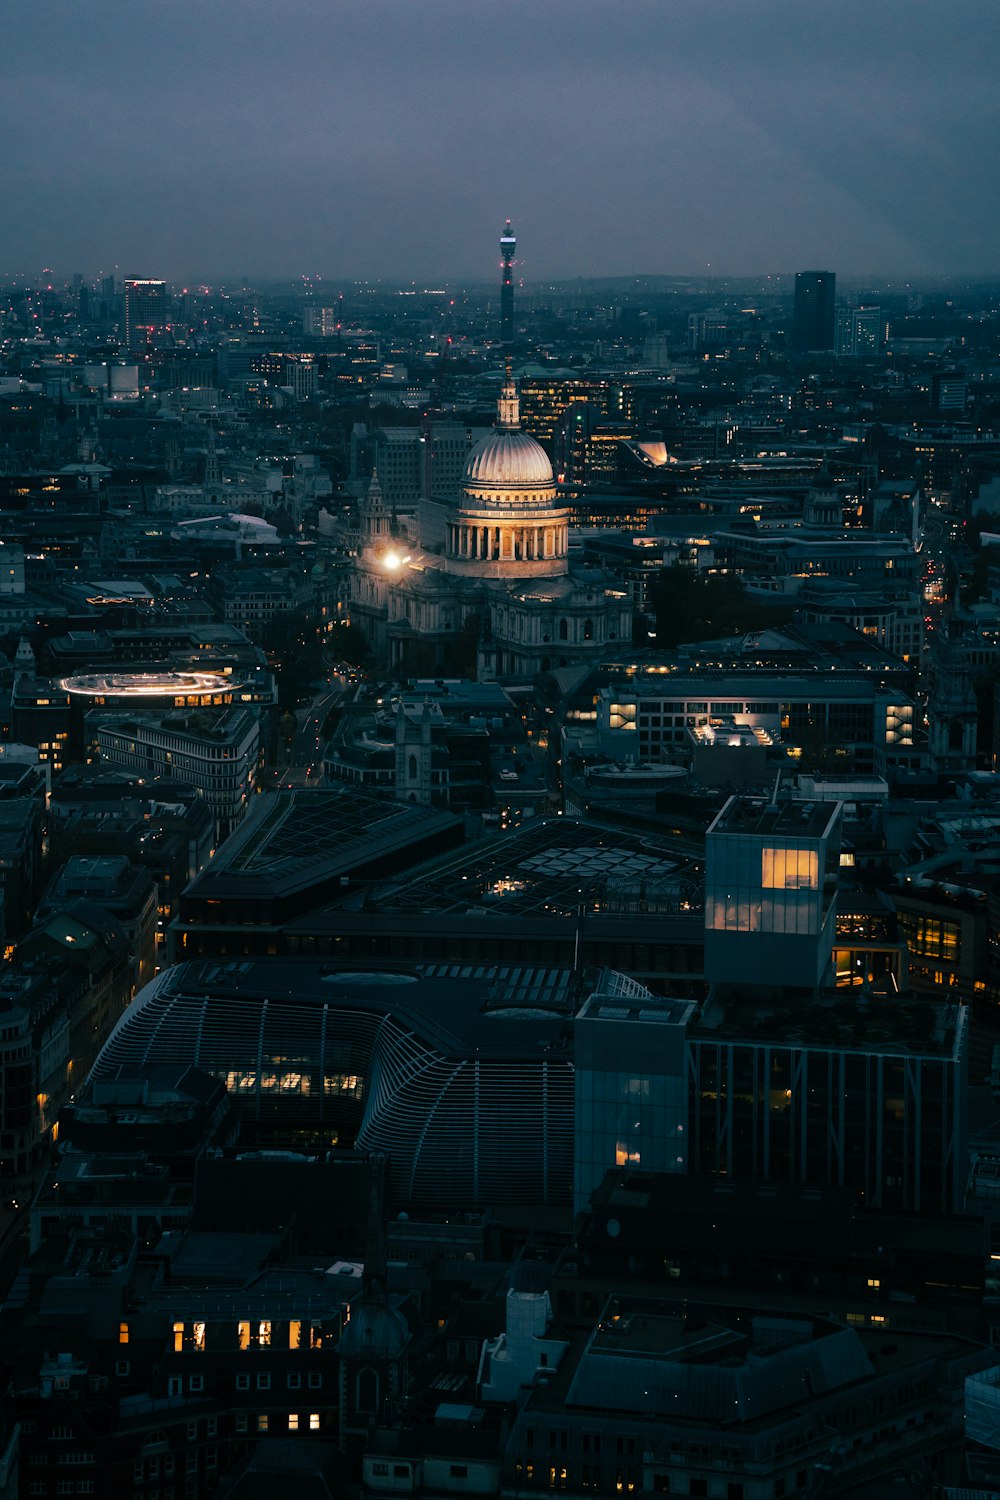 a view of the city of london at night